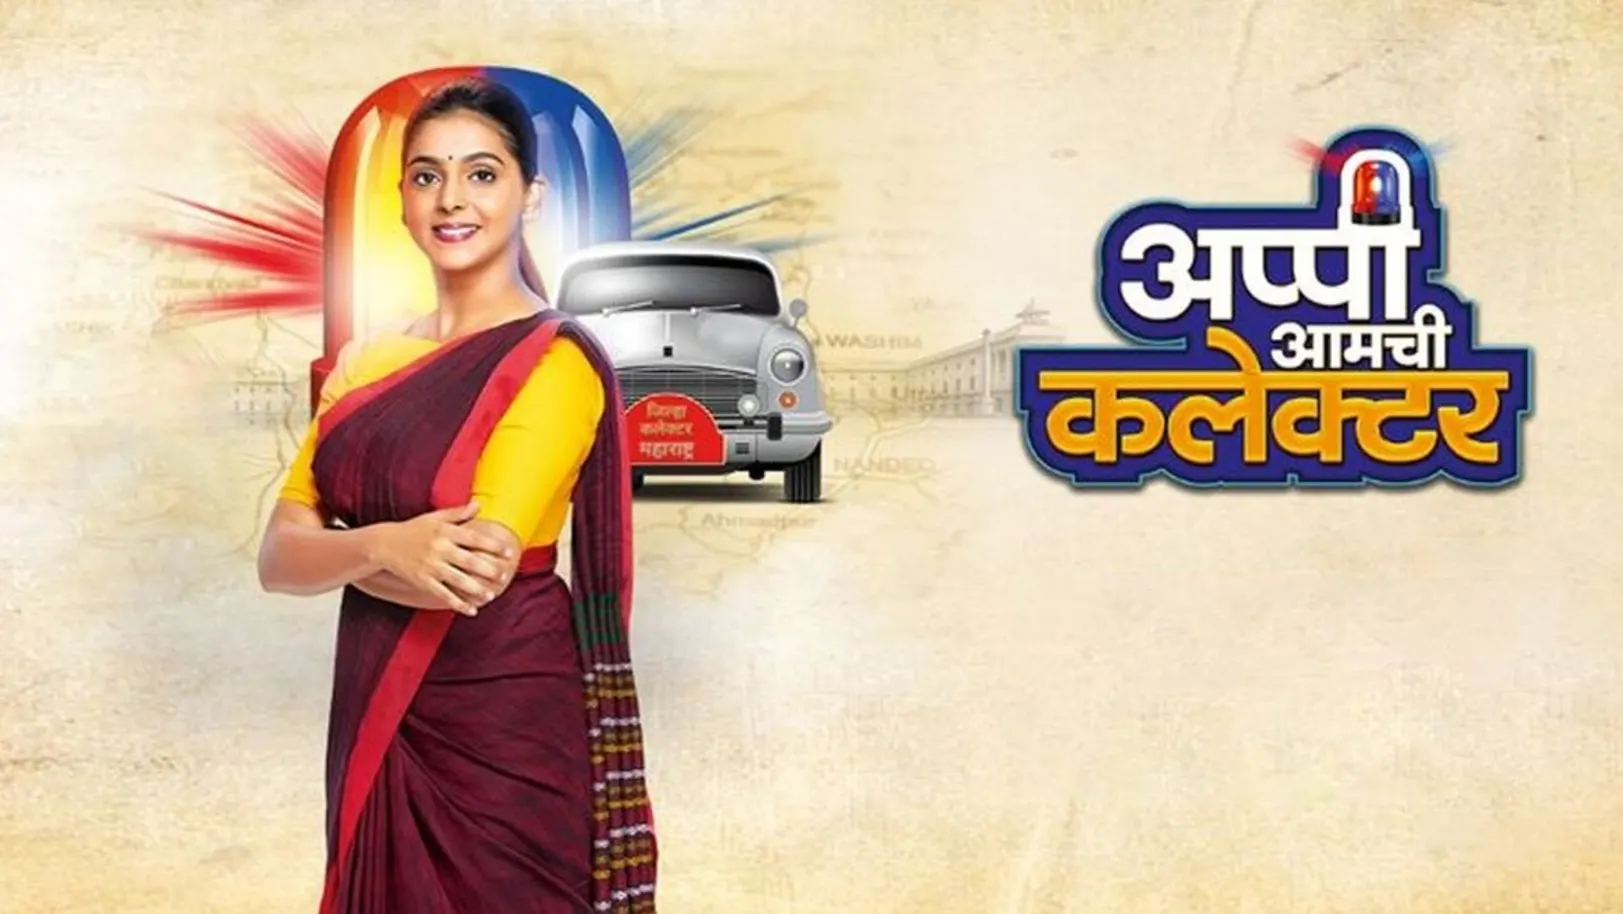 Aappi Amchi Collector Streaming Now On Zee Marathi